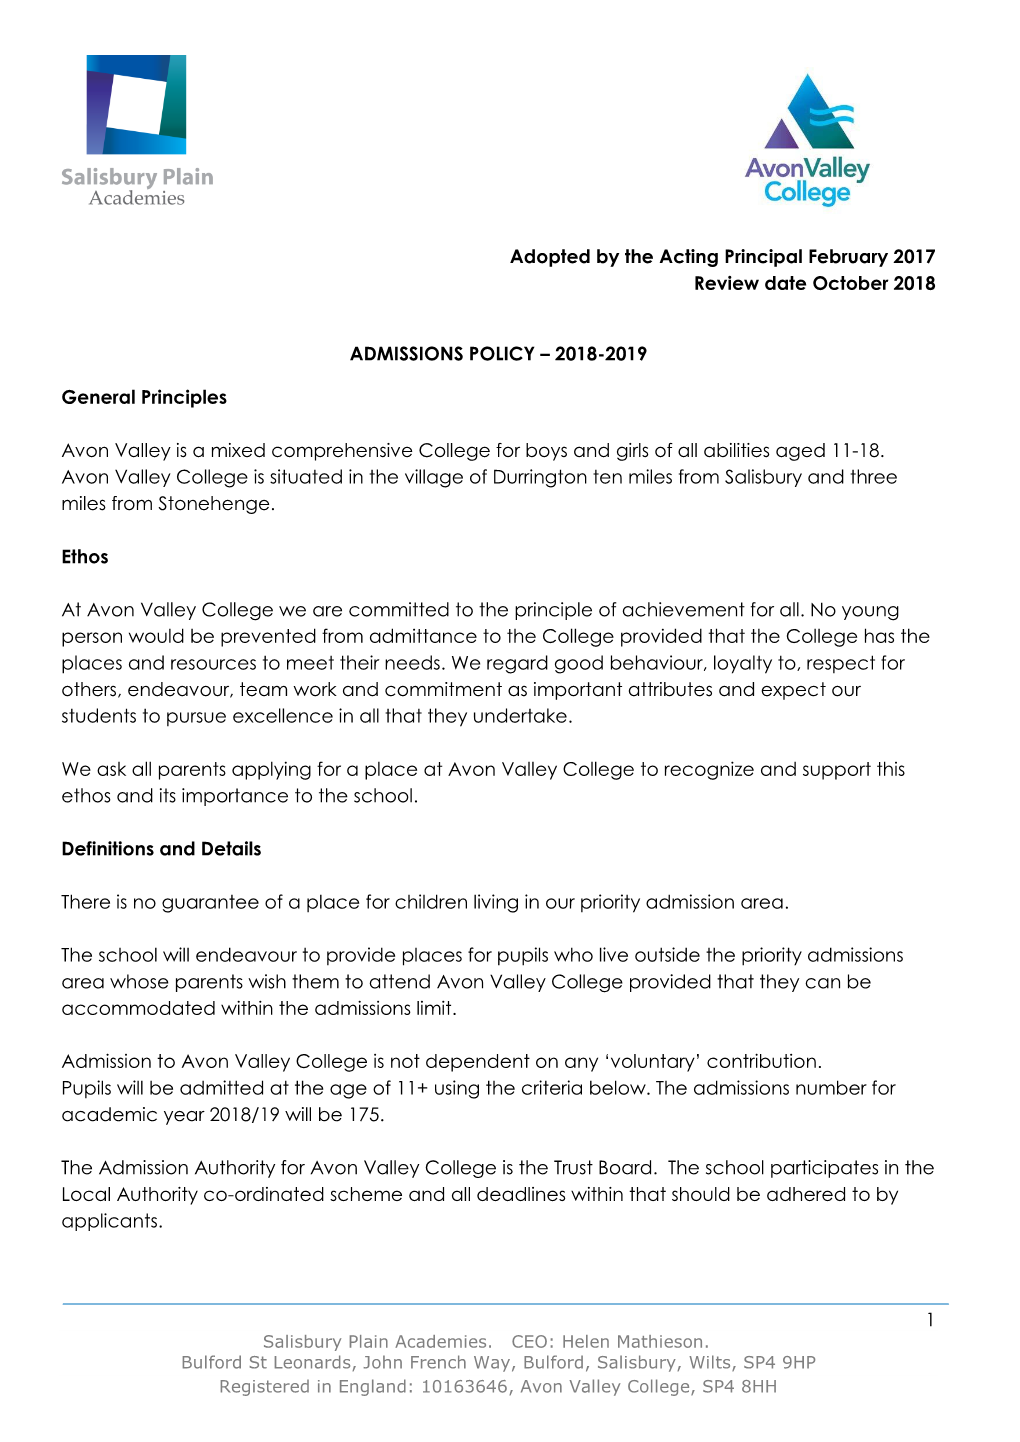 1 Adopted by the Acting Principal February 2017 Review Date October 2018 ADMISSIONS POLICY – 2018-2019 General Principles Avon